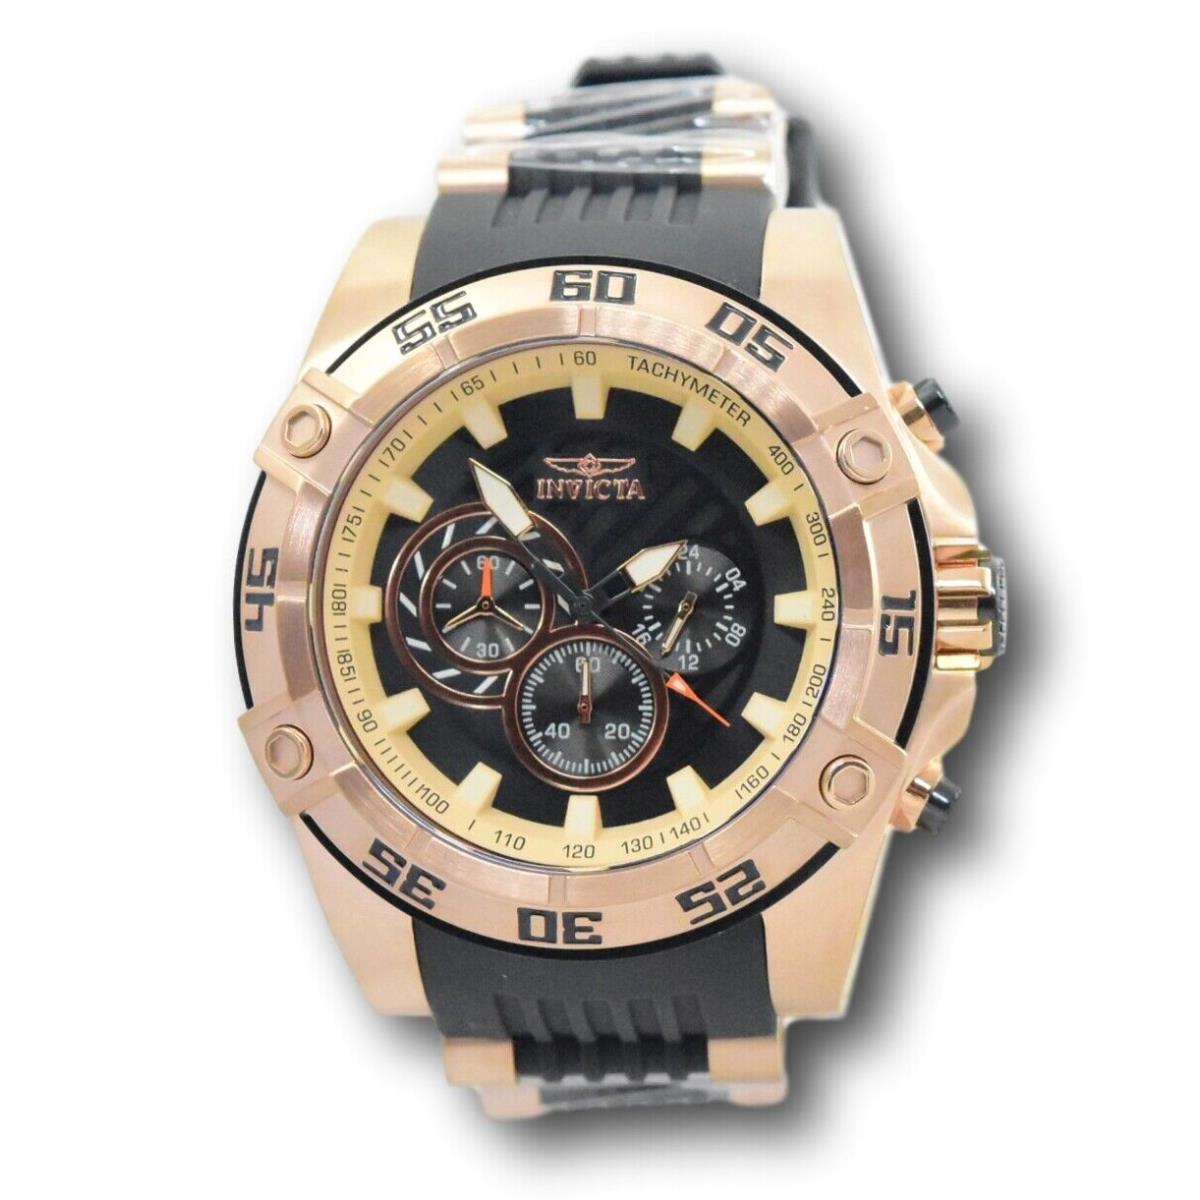 Invicta Speedway Viper 30109 Men`s Rose Gold Charcoal Chronograph Watch 52mm - Dial: Black, Band: Black, Bezel: Rose Gold